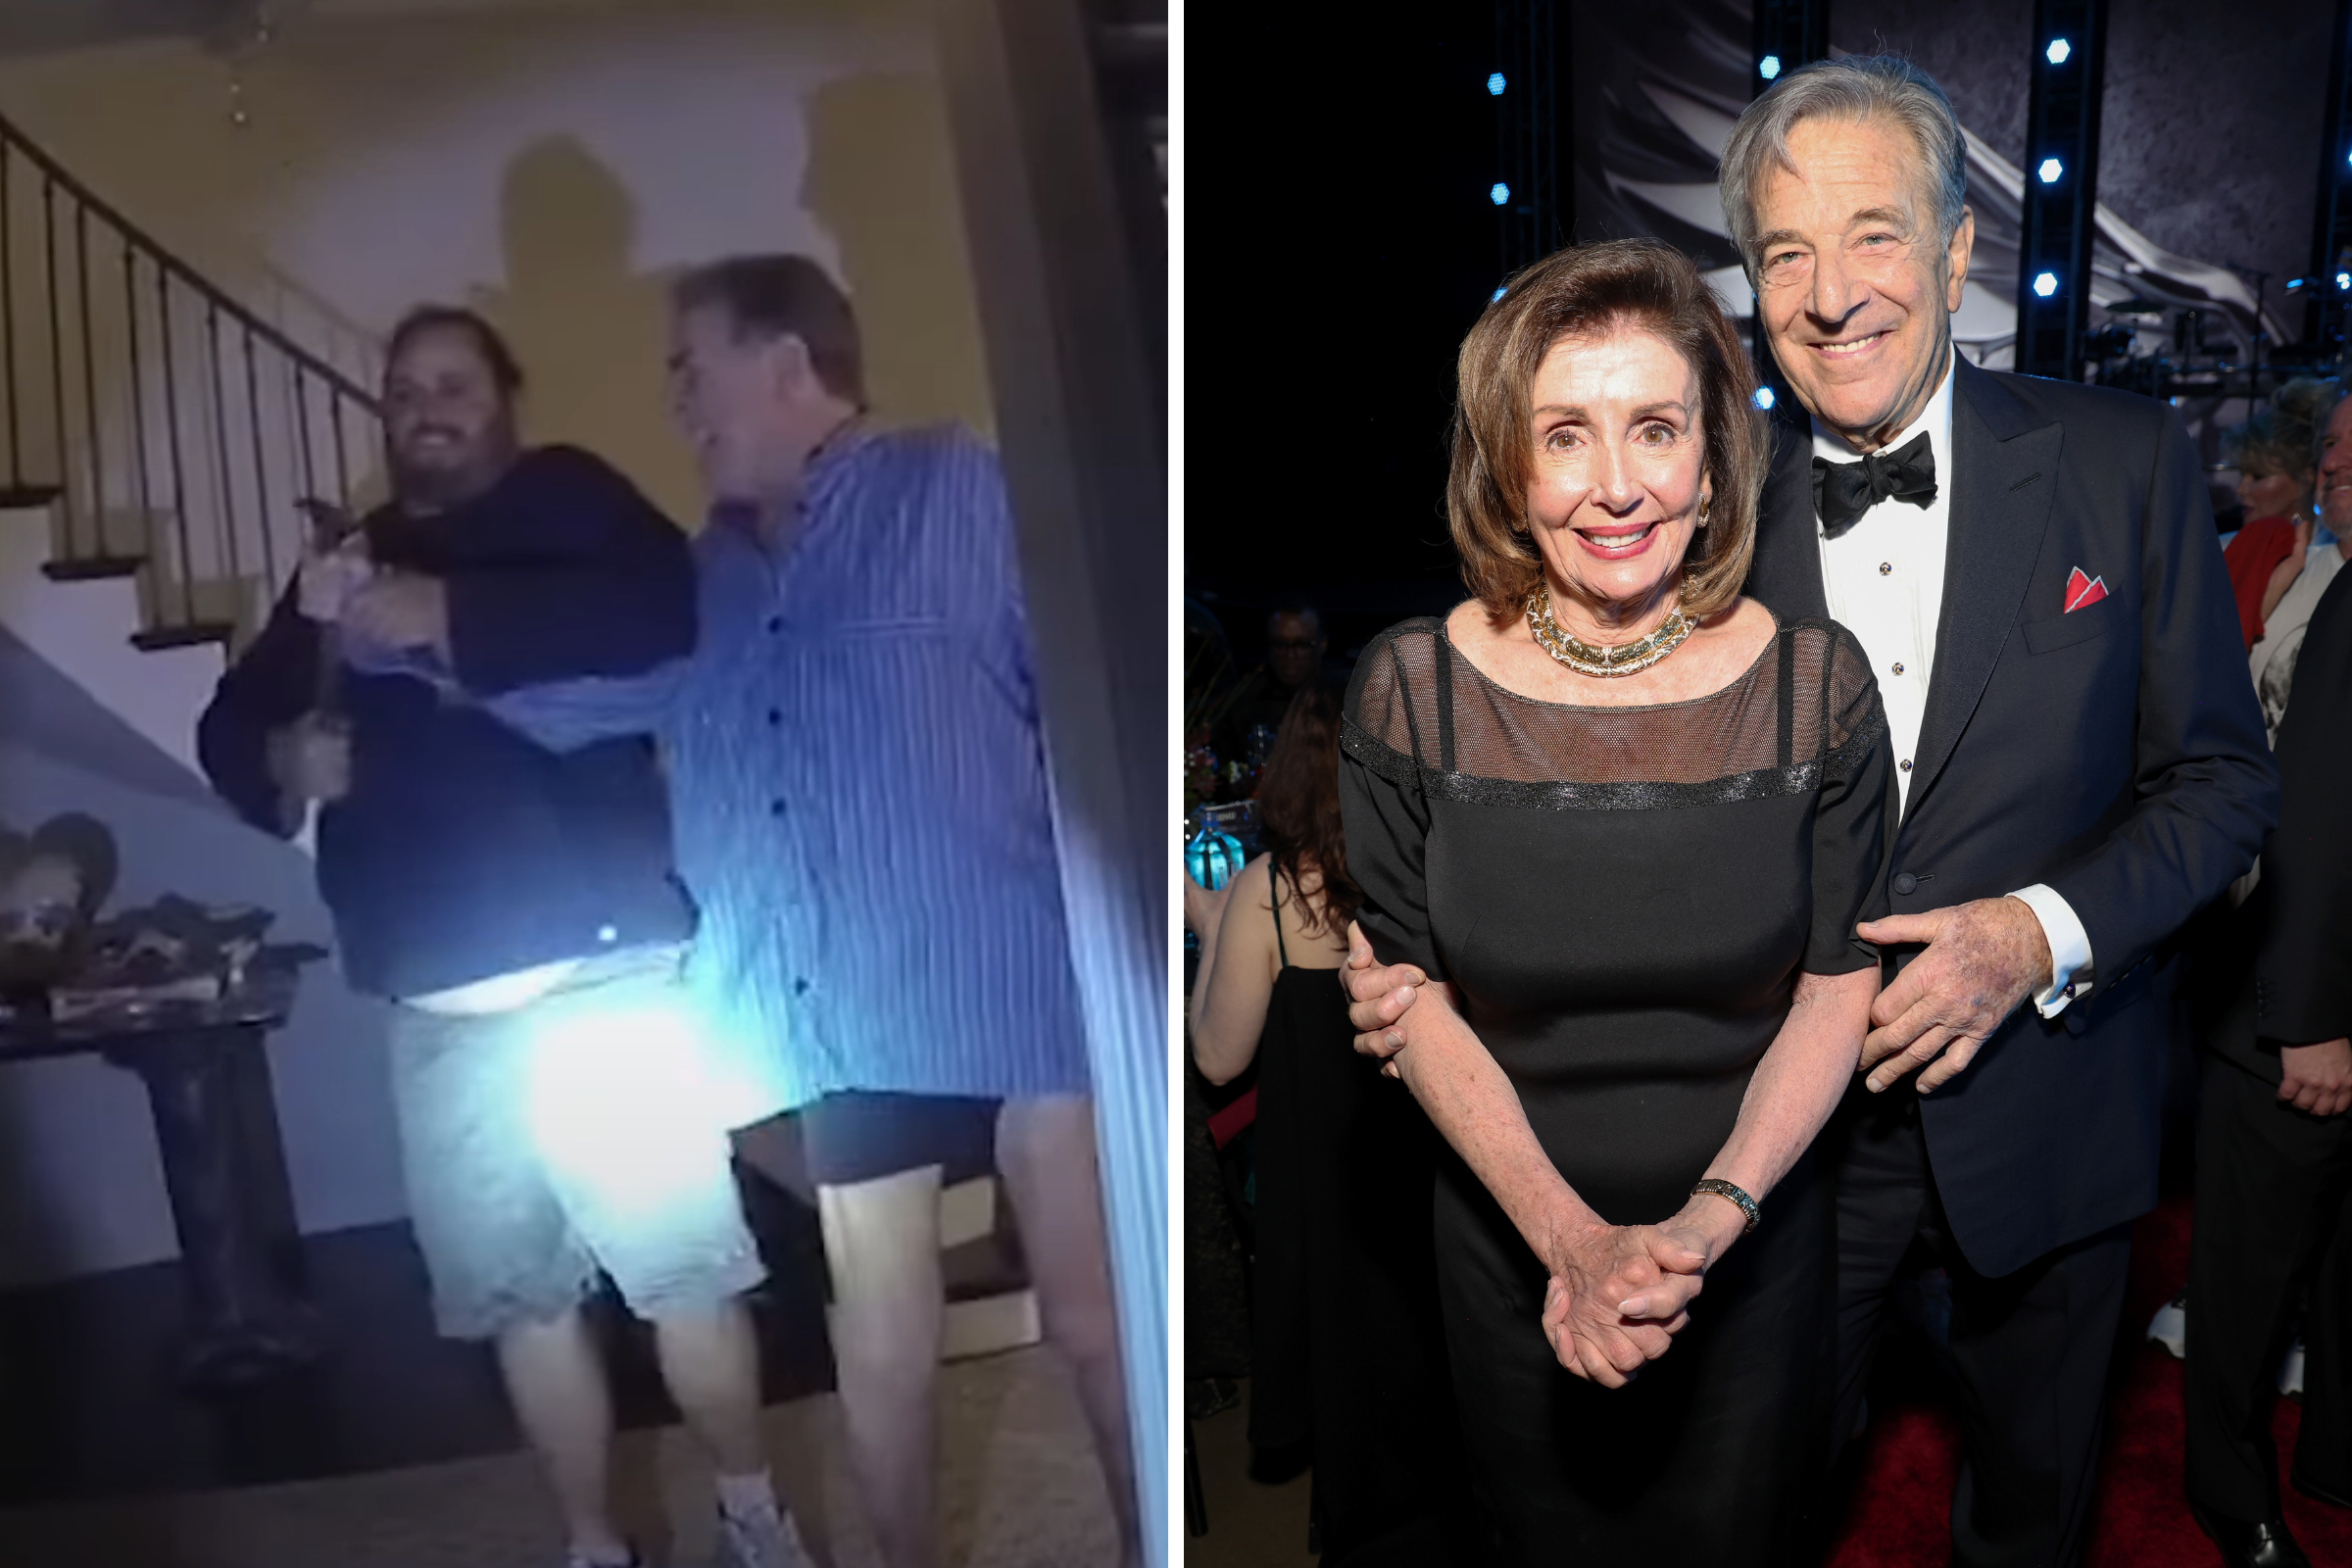 Why is Paul Pelosi attacker being sentenced again? Everything we know